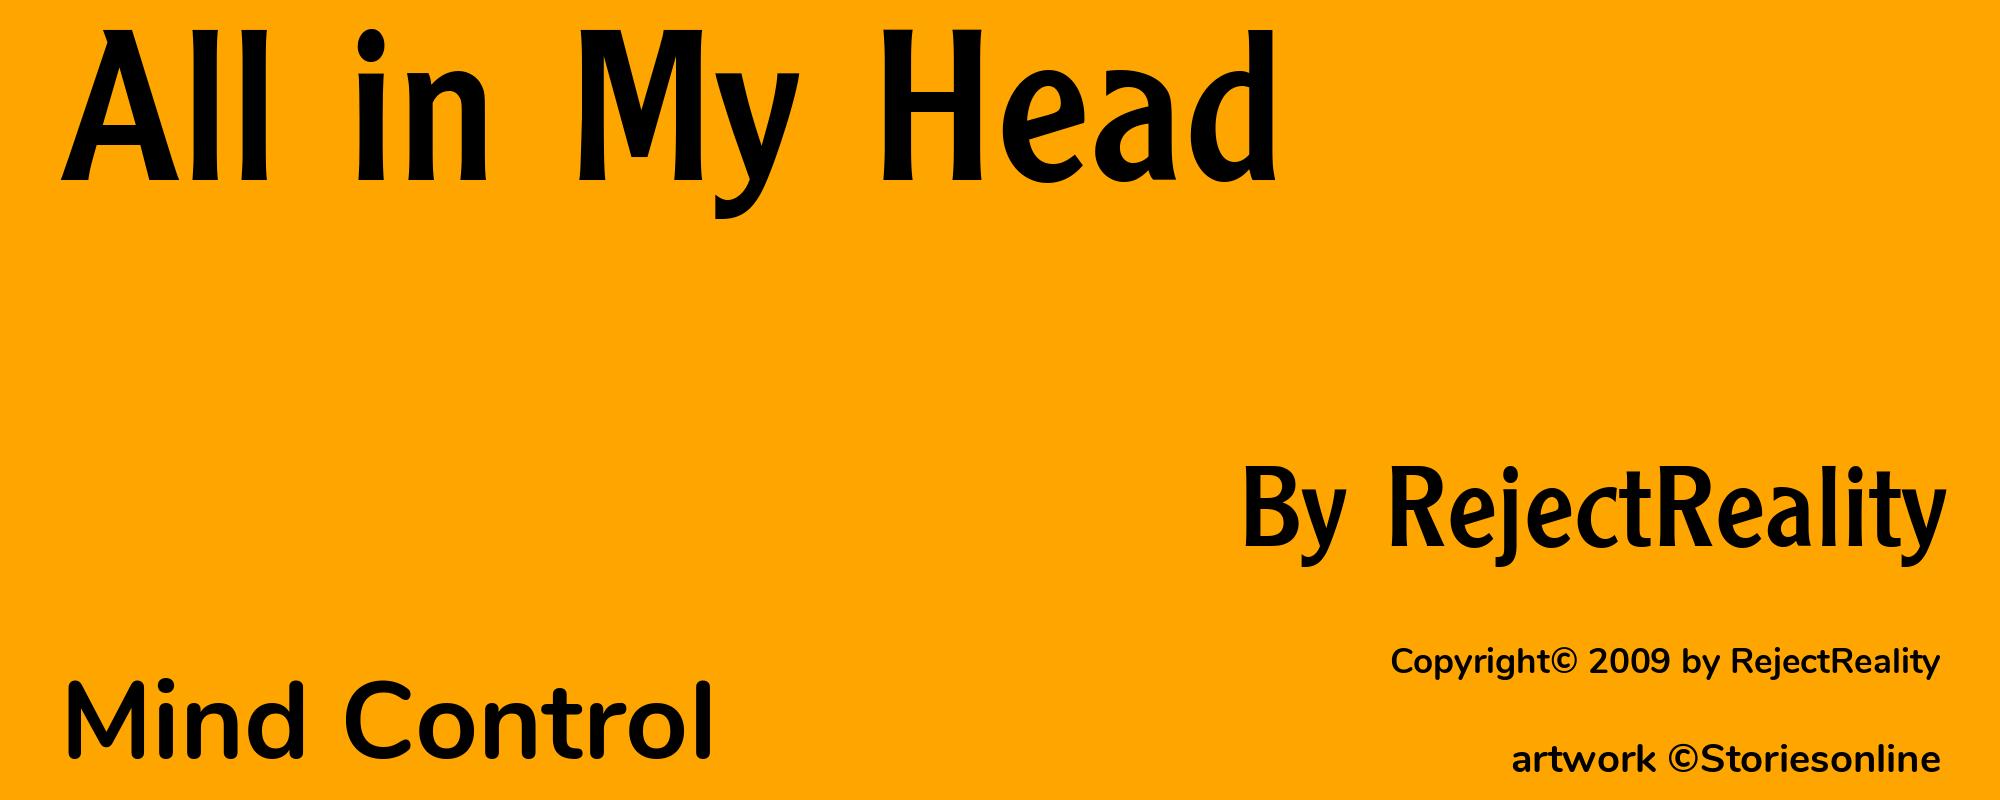 All in My Head - Cover